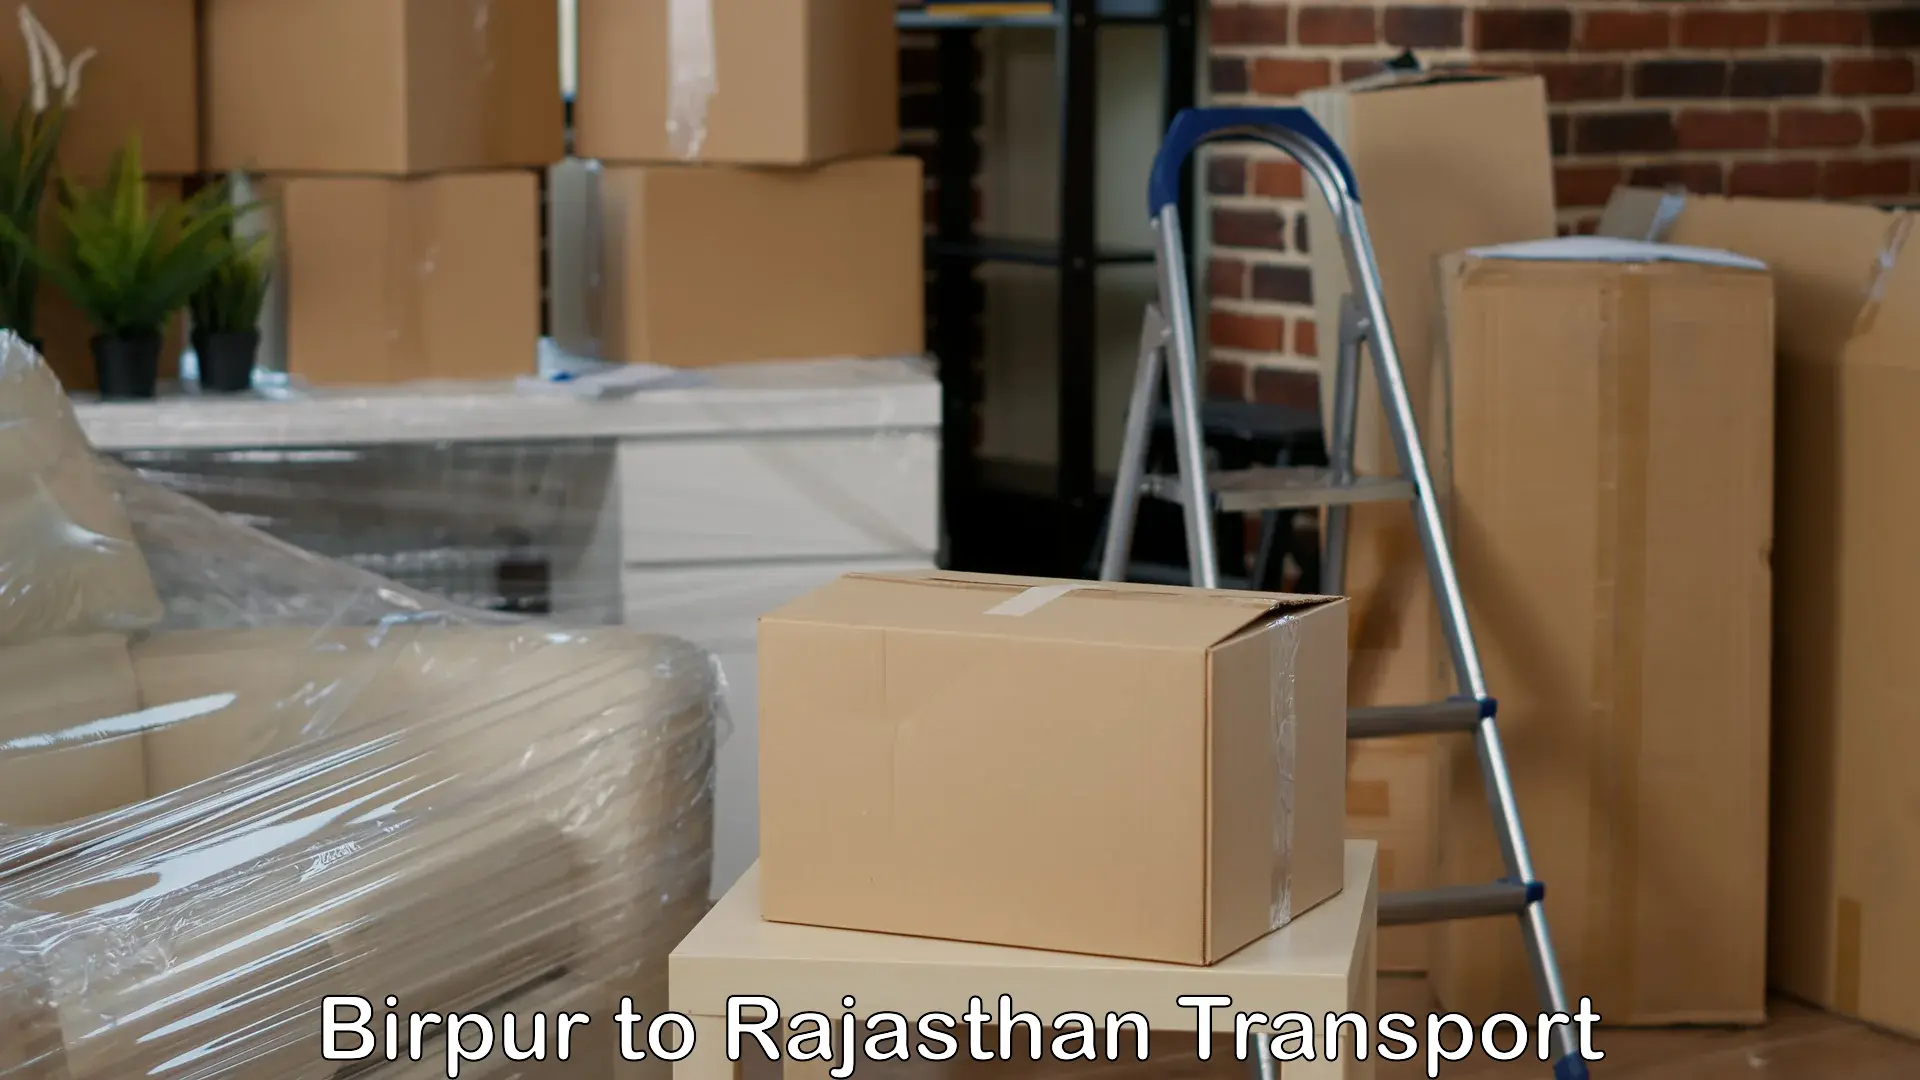 Part load transport service in India Birpur to Rajasthan